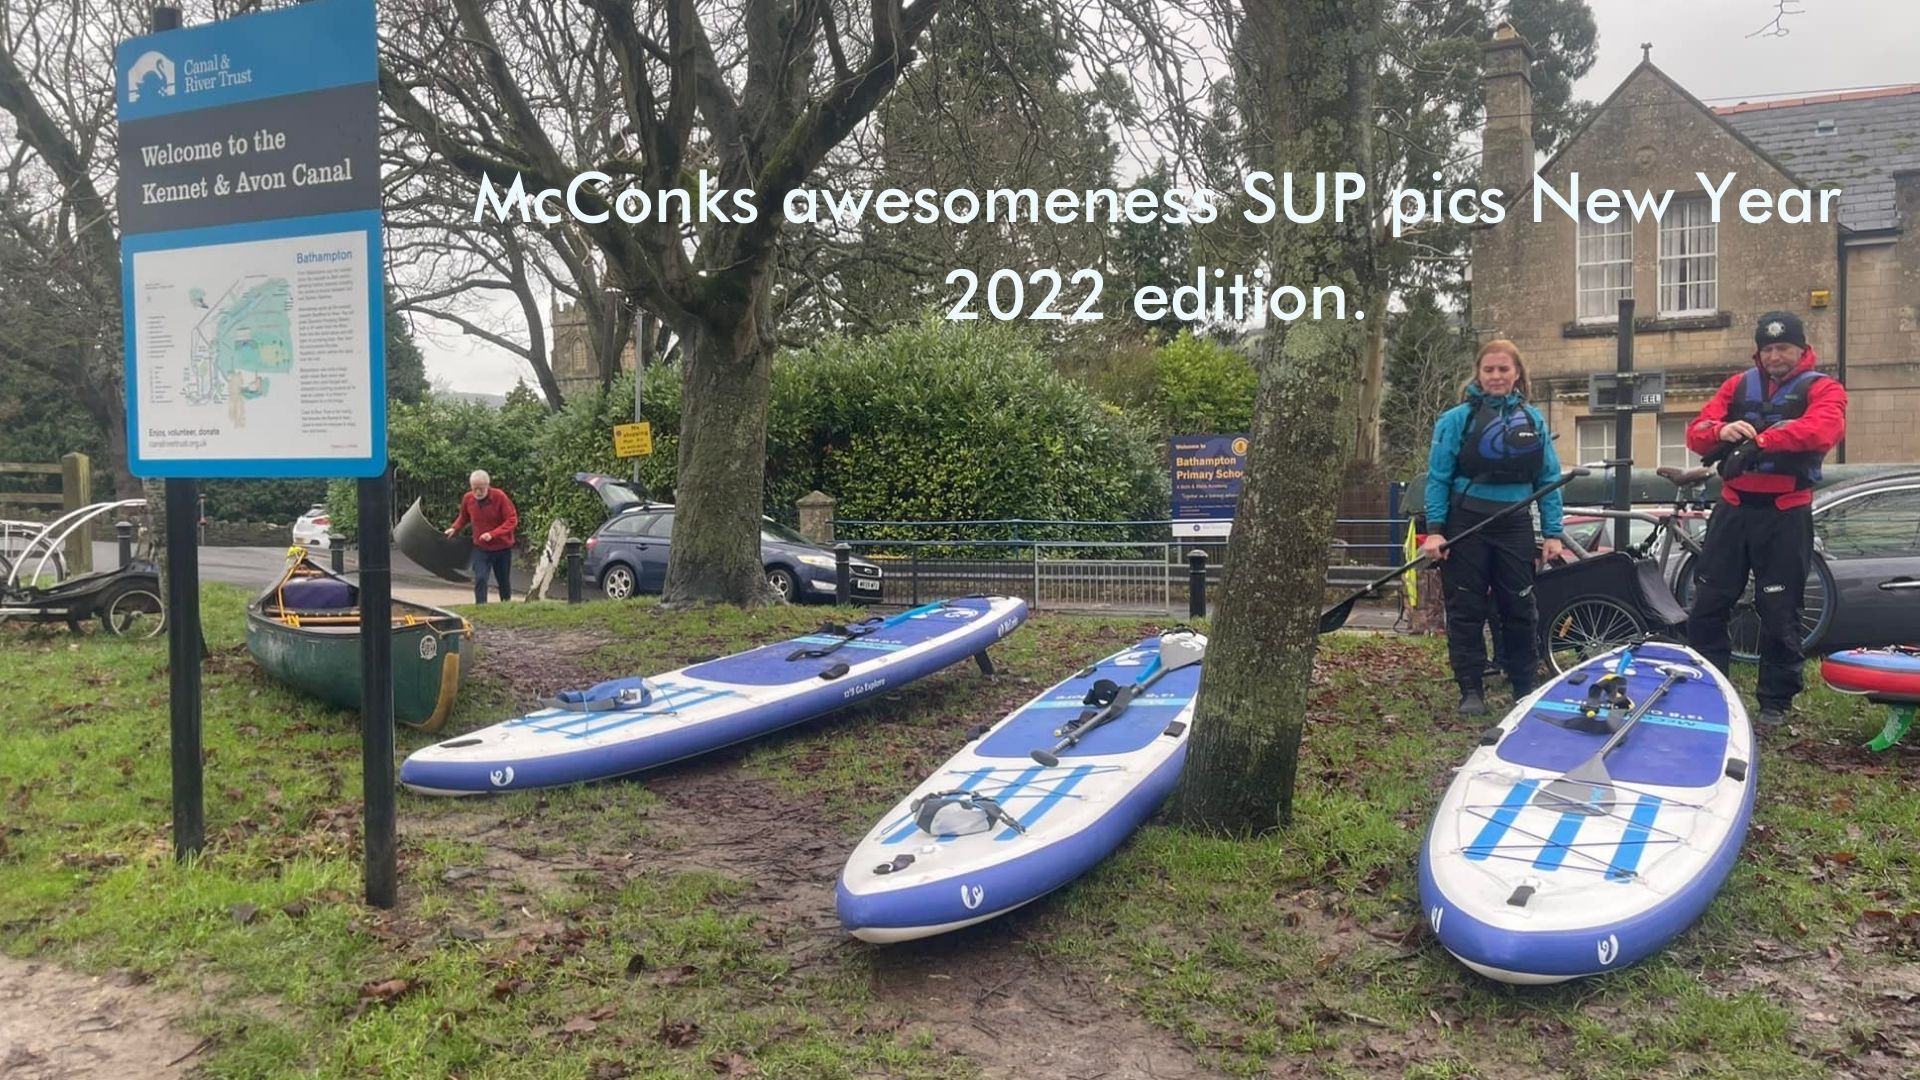 You are currently viewing McConks awesomeness SUP pics New Year 2022 edition.